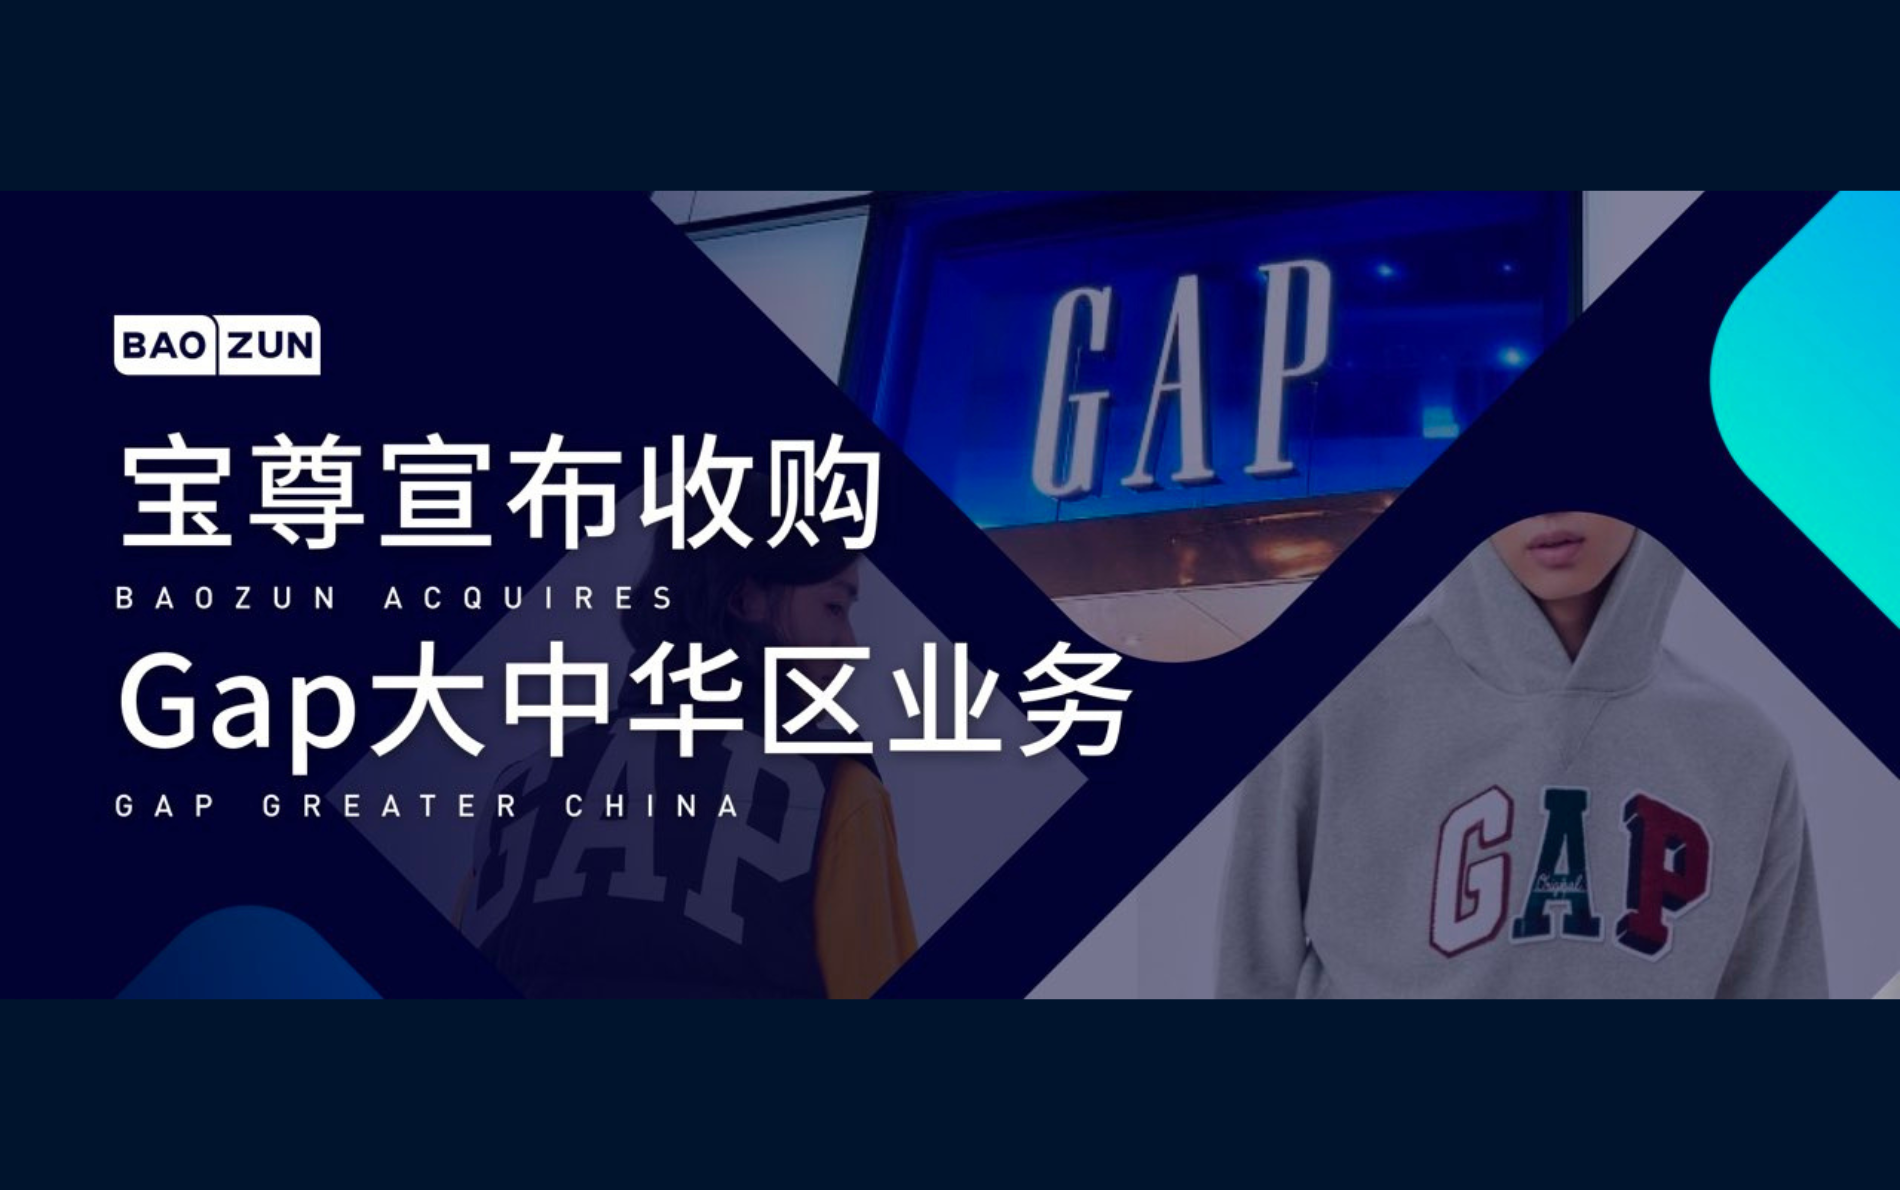 Baozun Acquires Gap Greater China and Establishes Brand Management as a New Business Line